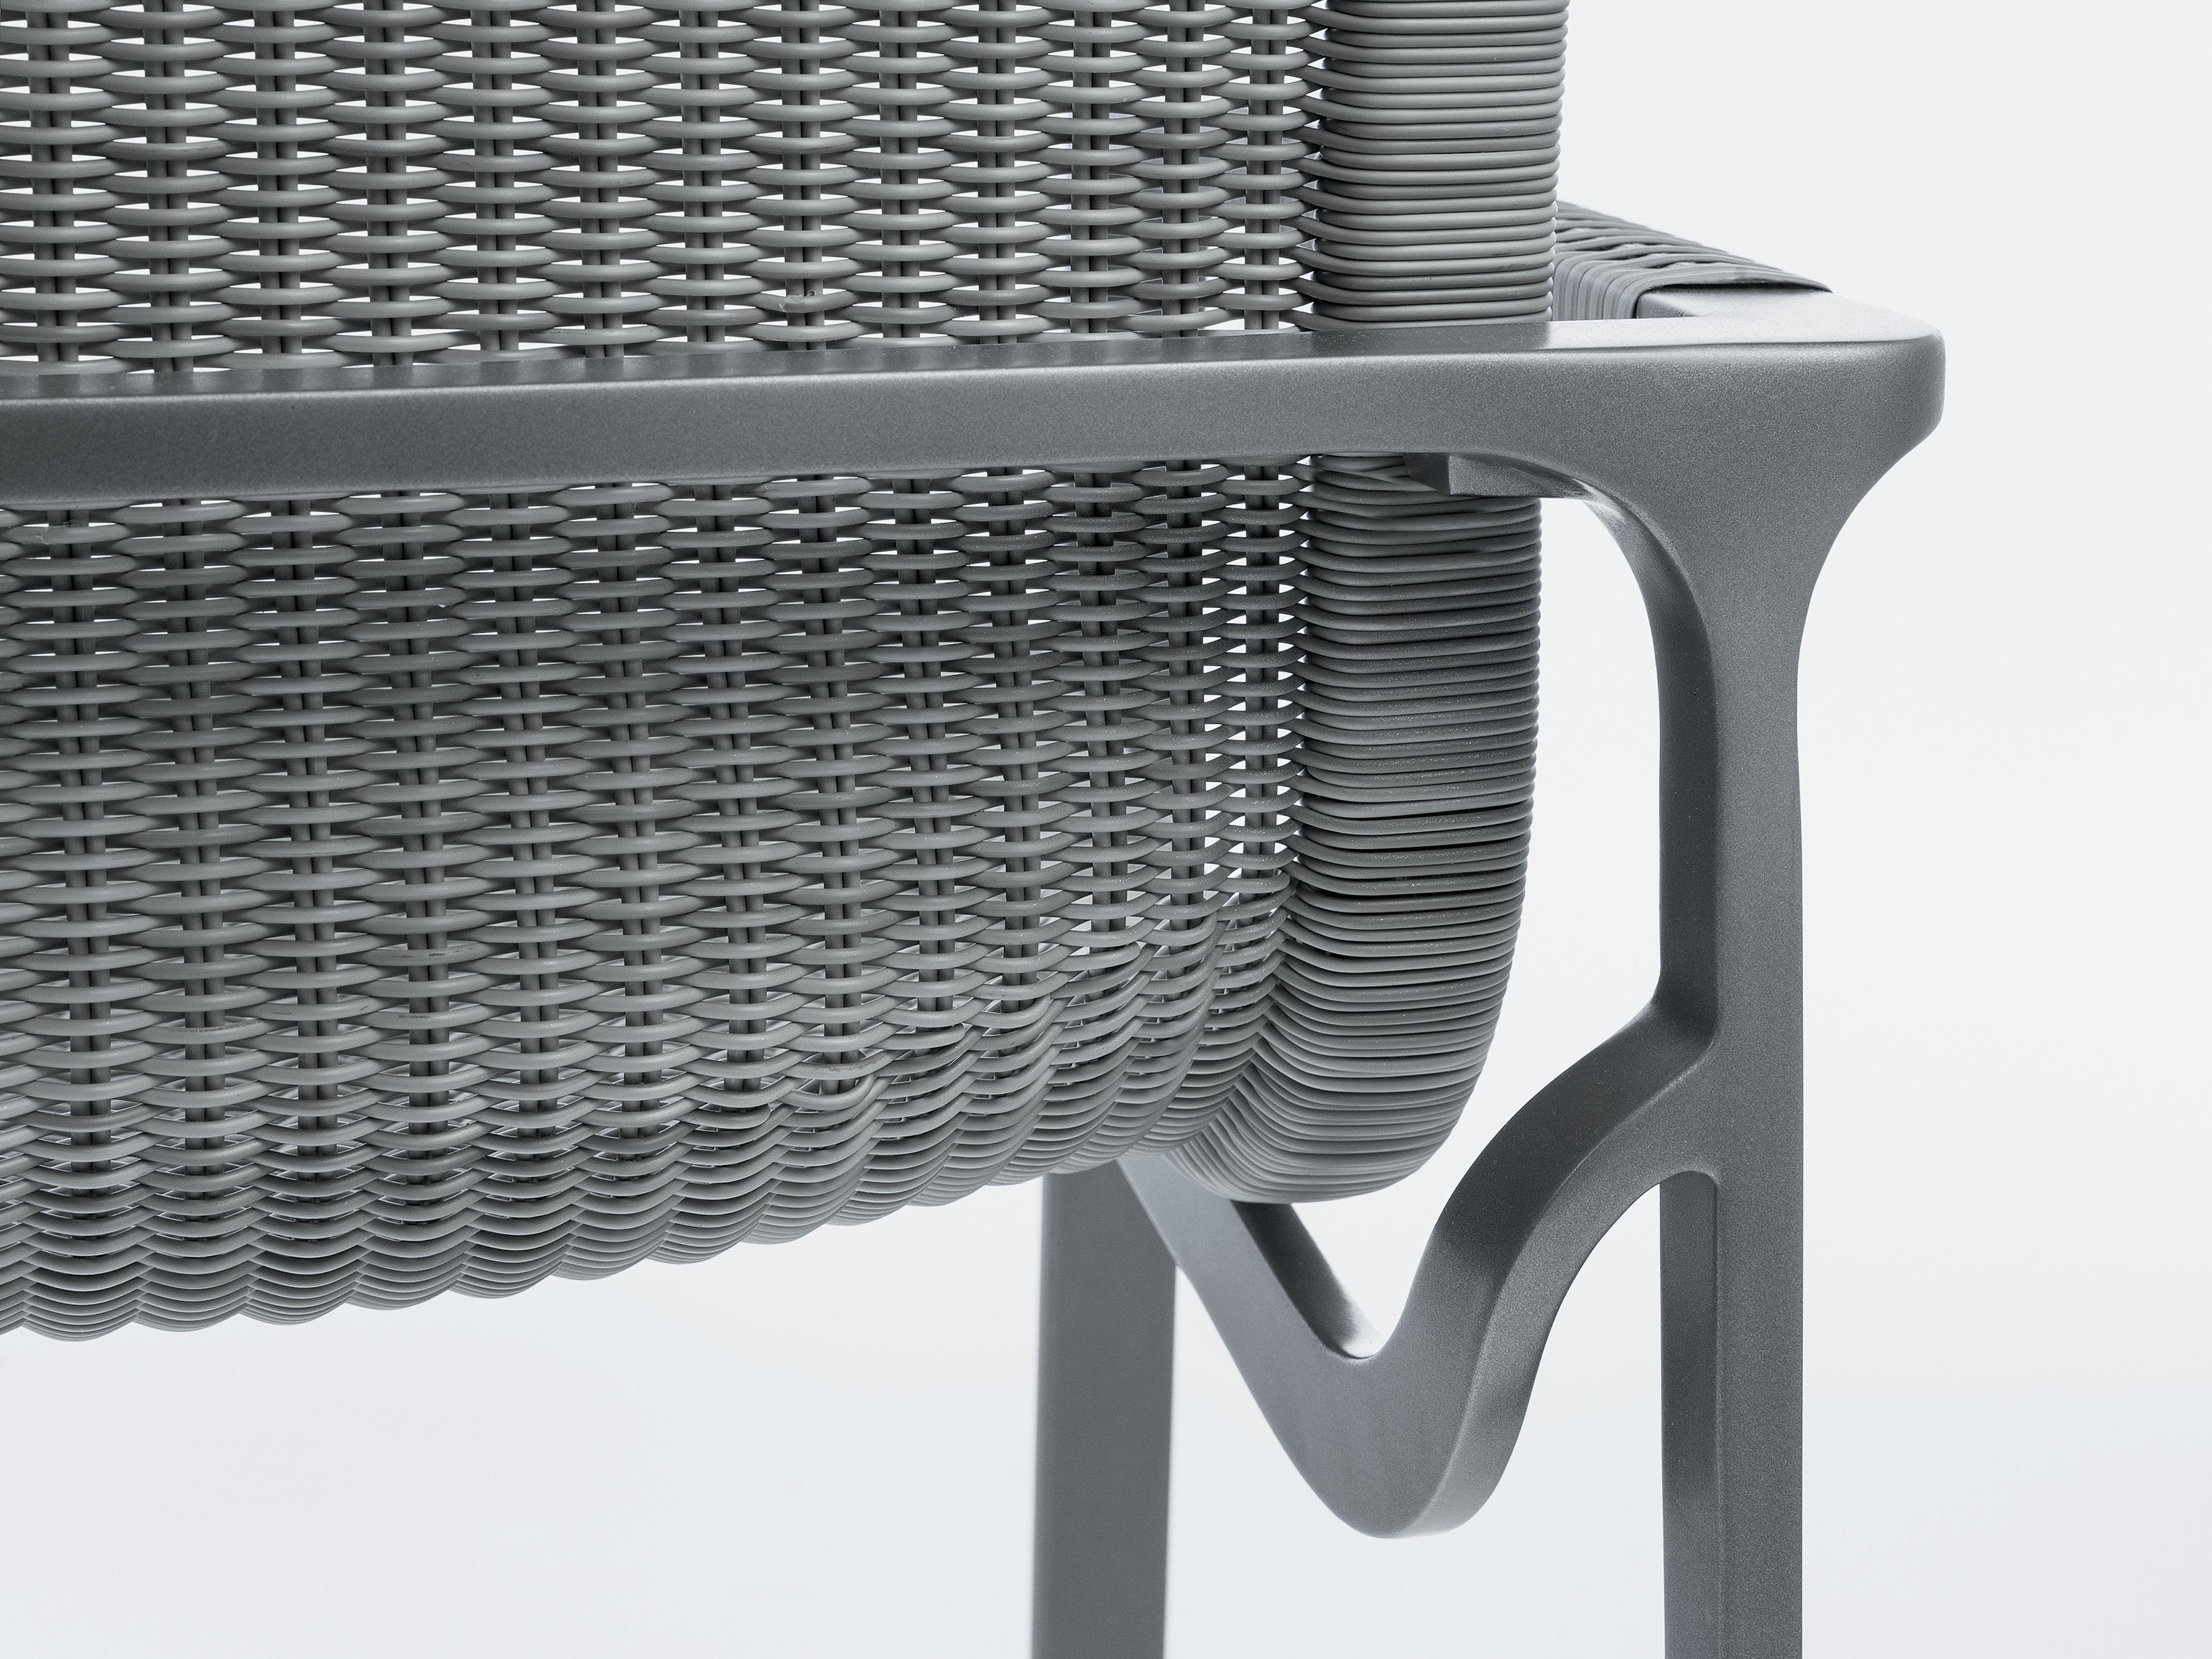 With a woven seat and seamless, organic frame, this stackable outdoor Keel Dining Chair is the seductive companion to the Keel Dining Table.

Additional Information:
Frame: Powder coated metal
Seat: Woven fiber
Finish: Oyster 
Dimensions: 24 W